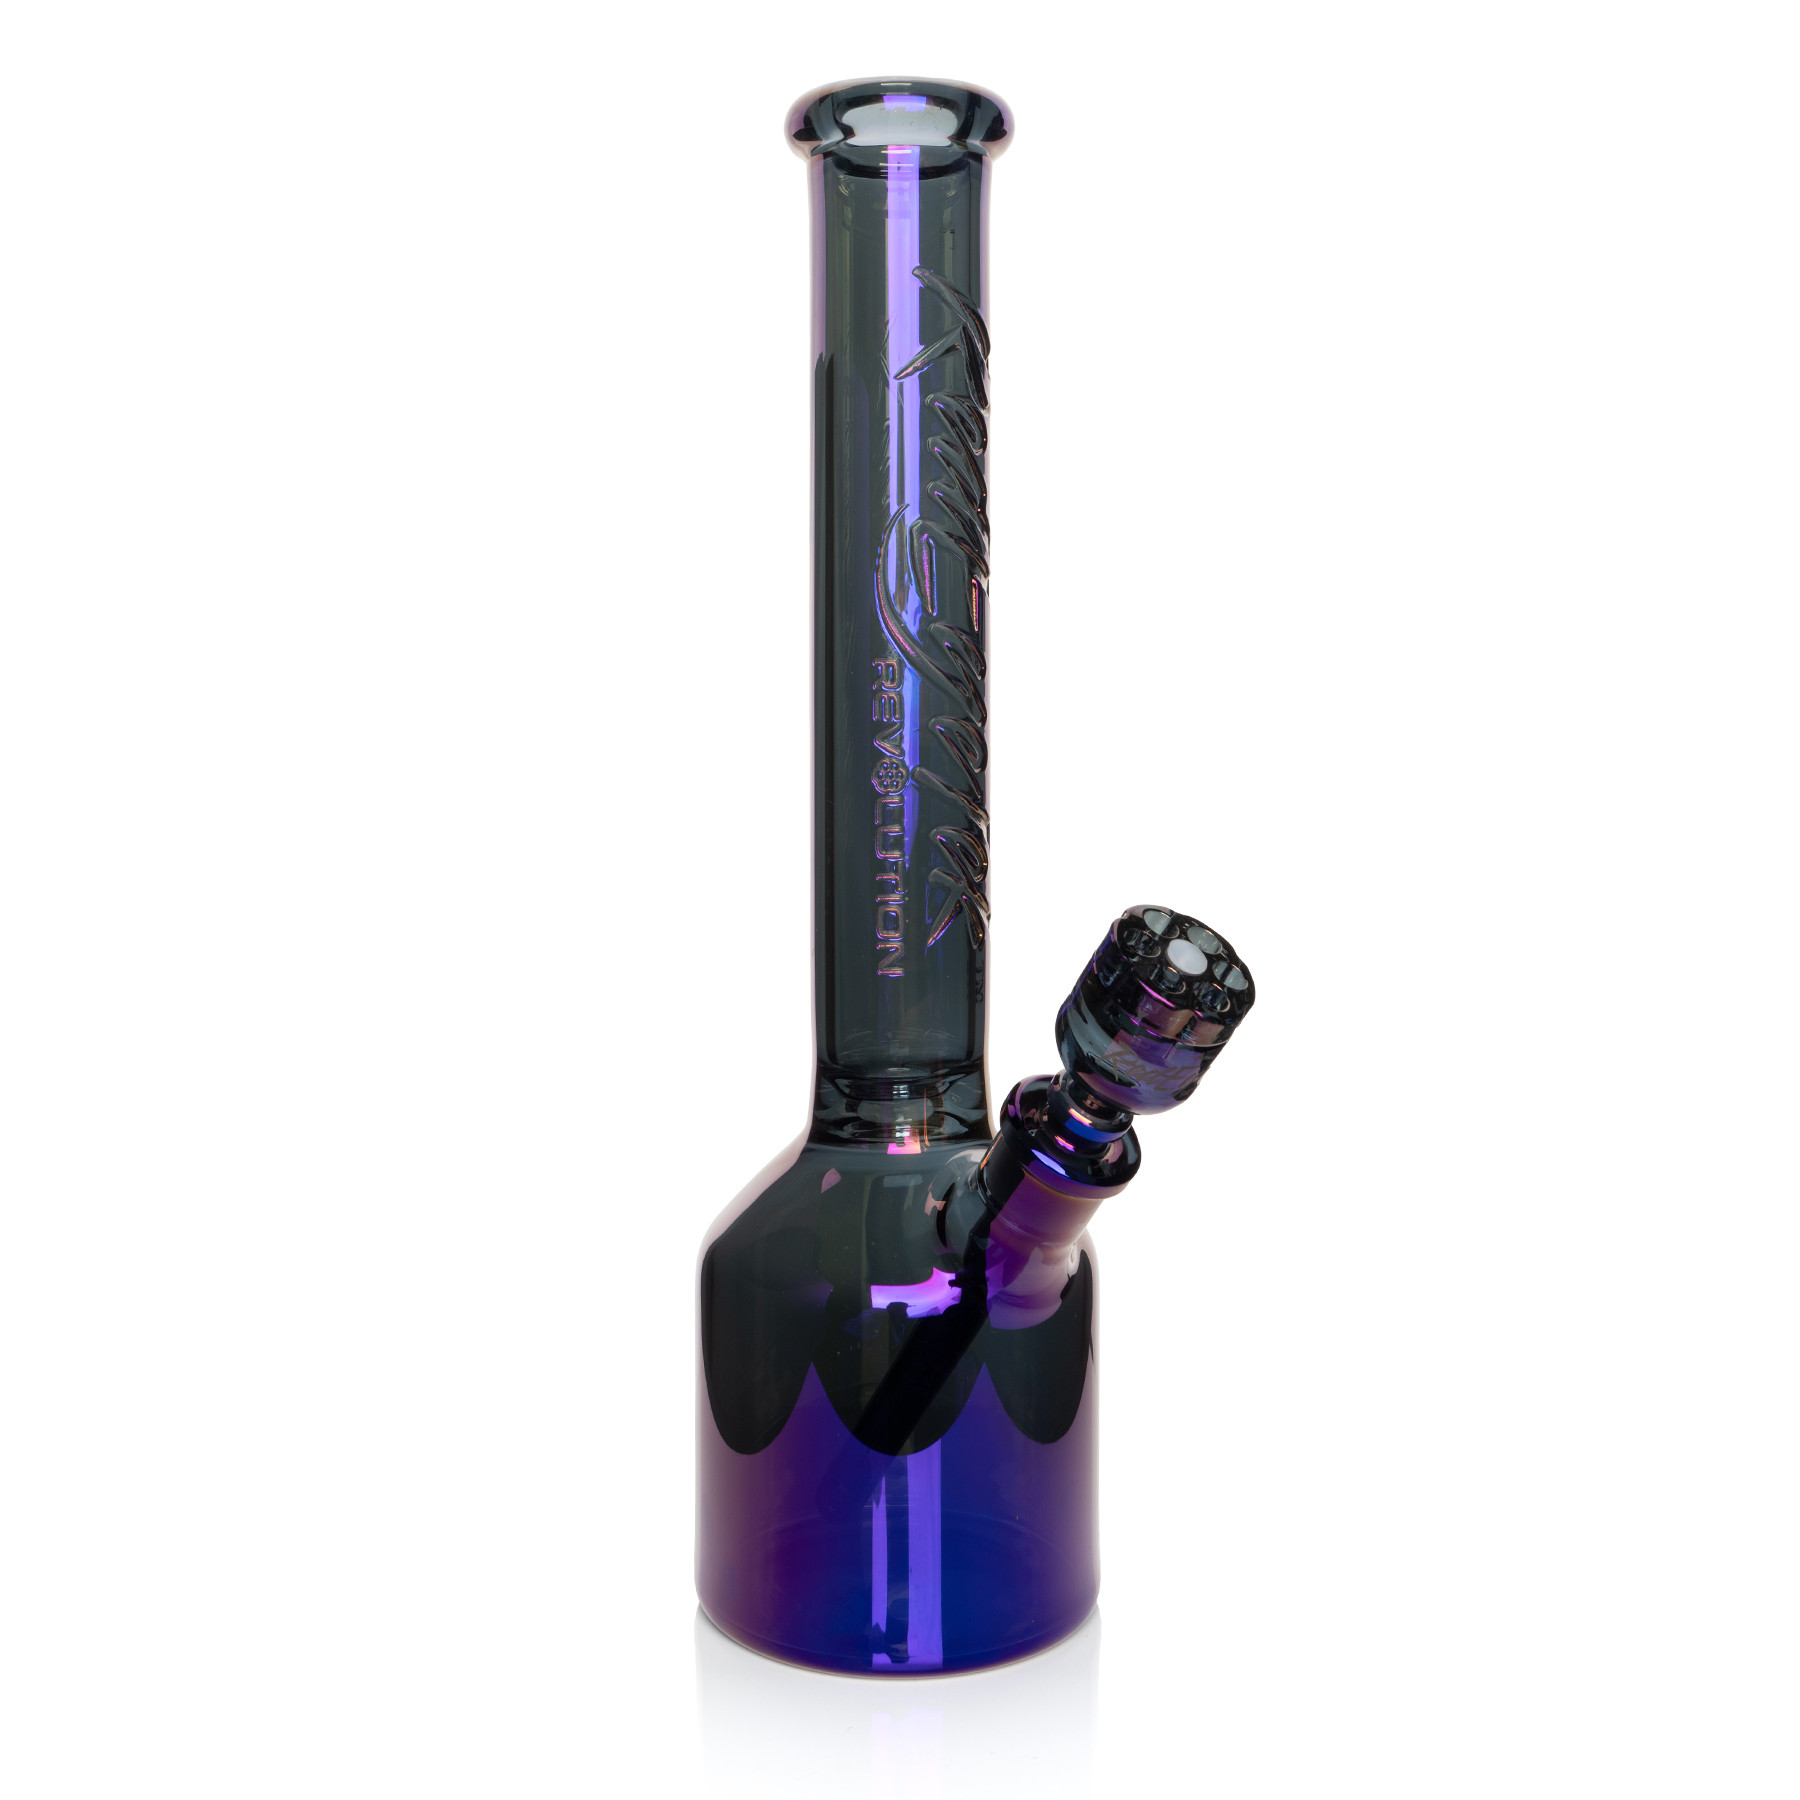 17" 7mm Thick Metallic Terminator Finish Revolution Canteen Base Water Pipe